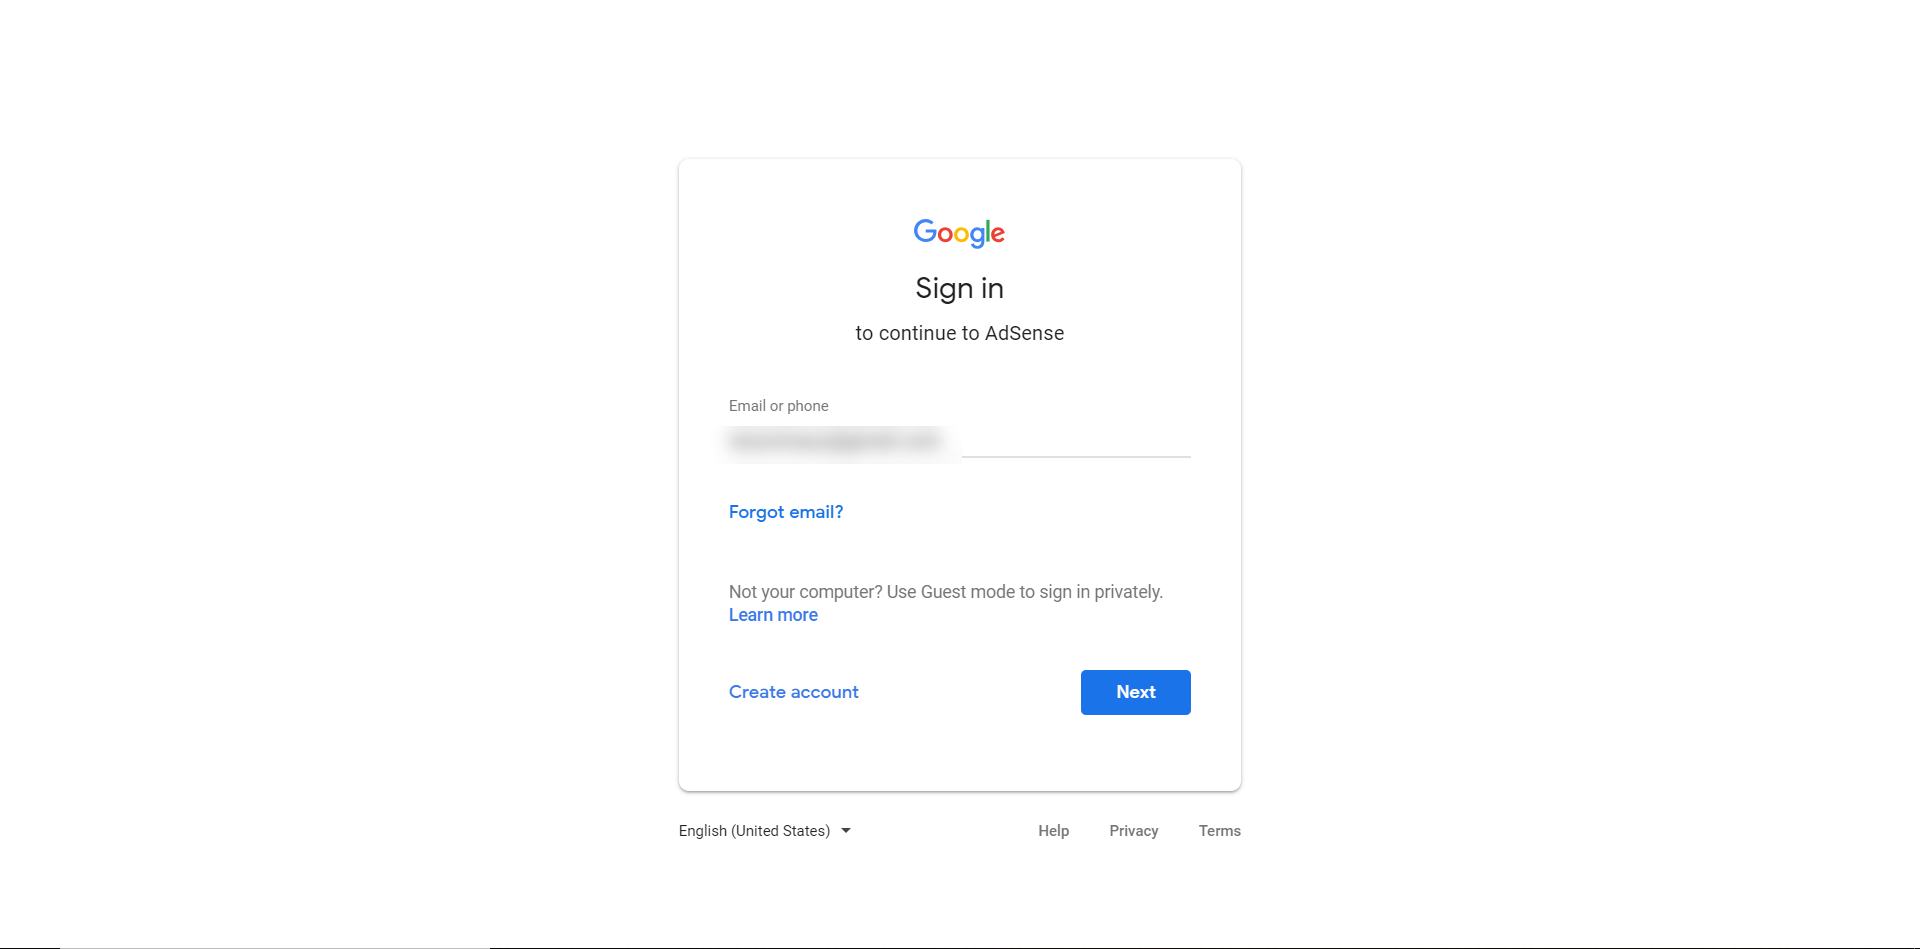 Step 3 - Sign In to Your Google Account